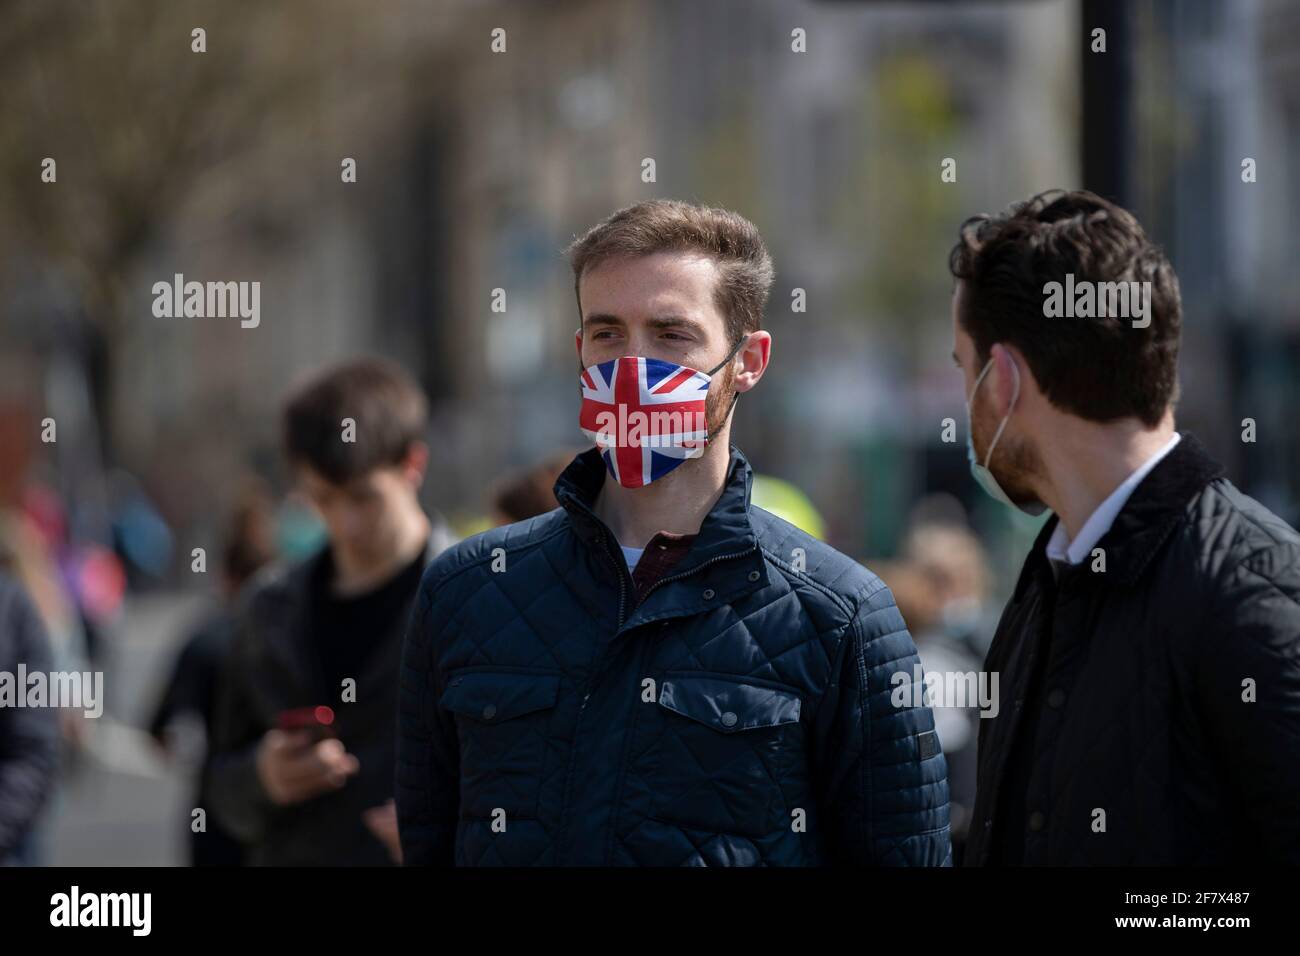 Cardiff, Wales, UK. 10th Apr, 2021. A man wearing a union jack face-mask stands outside Cardiff Castle in Cardiff city centre as a behind-closed-doors gun salute is held in the castle grounds to mark the death of Prince Philip. Credit: Mark Hawkins/Alamy Live News Stock Photo